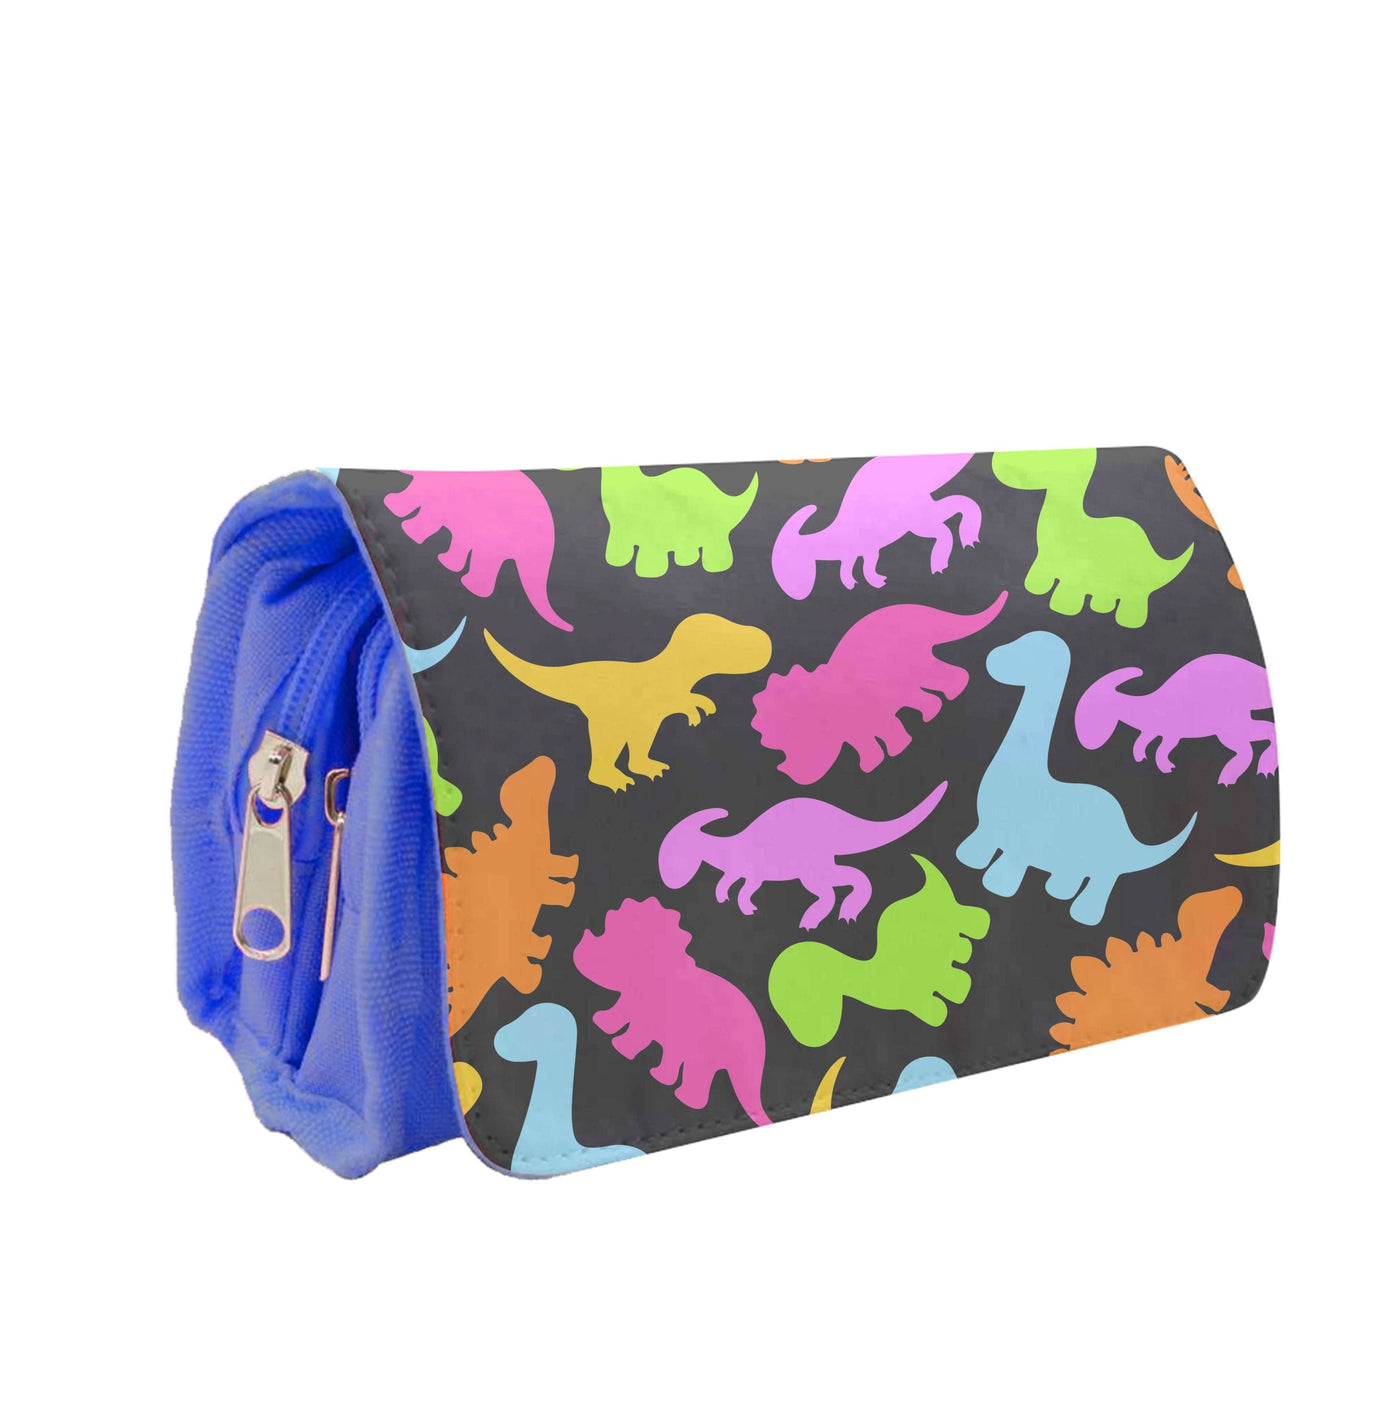 Dinosaurs Collage - Dinosaurs Pencil Case